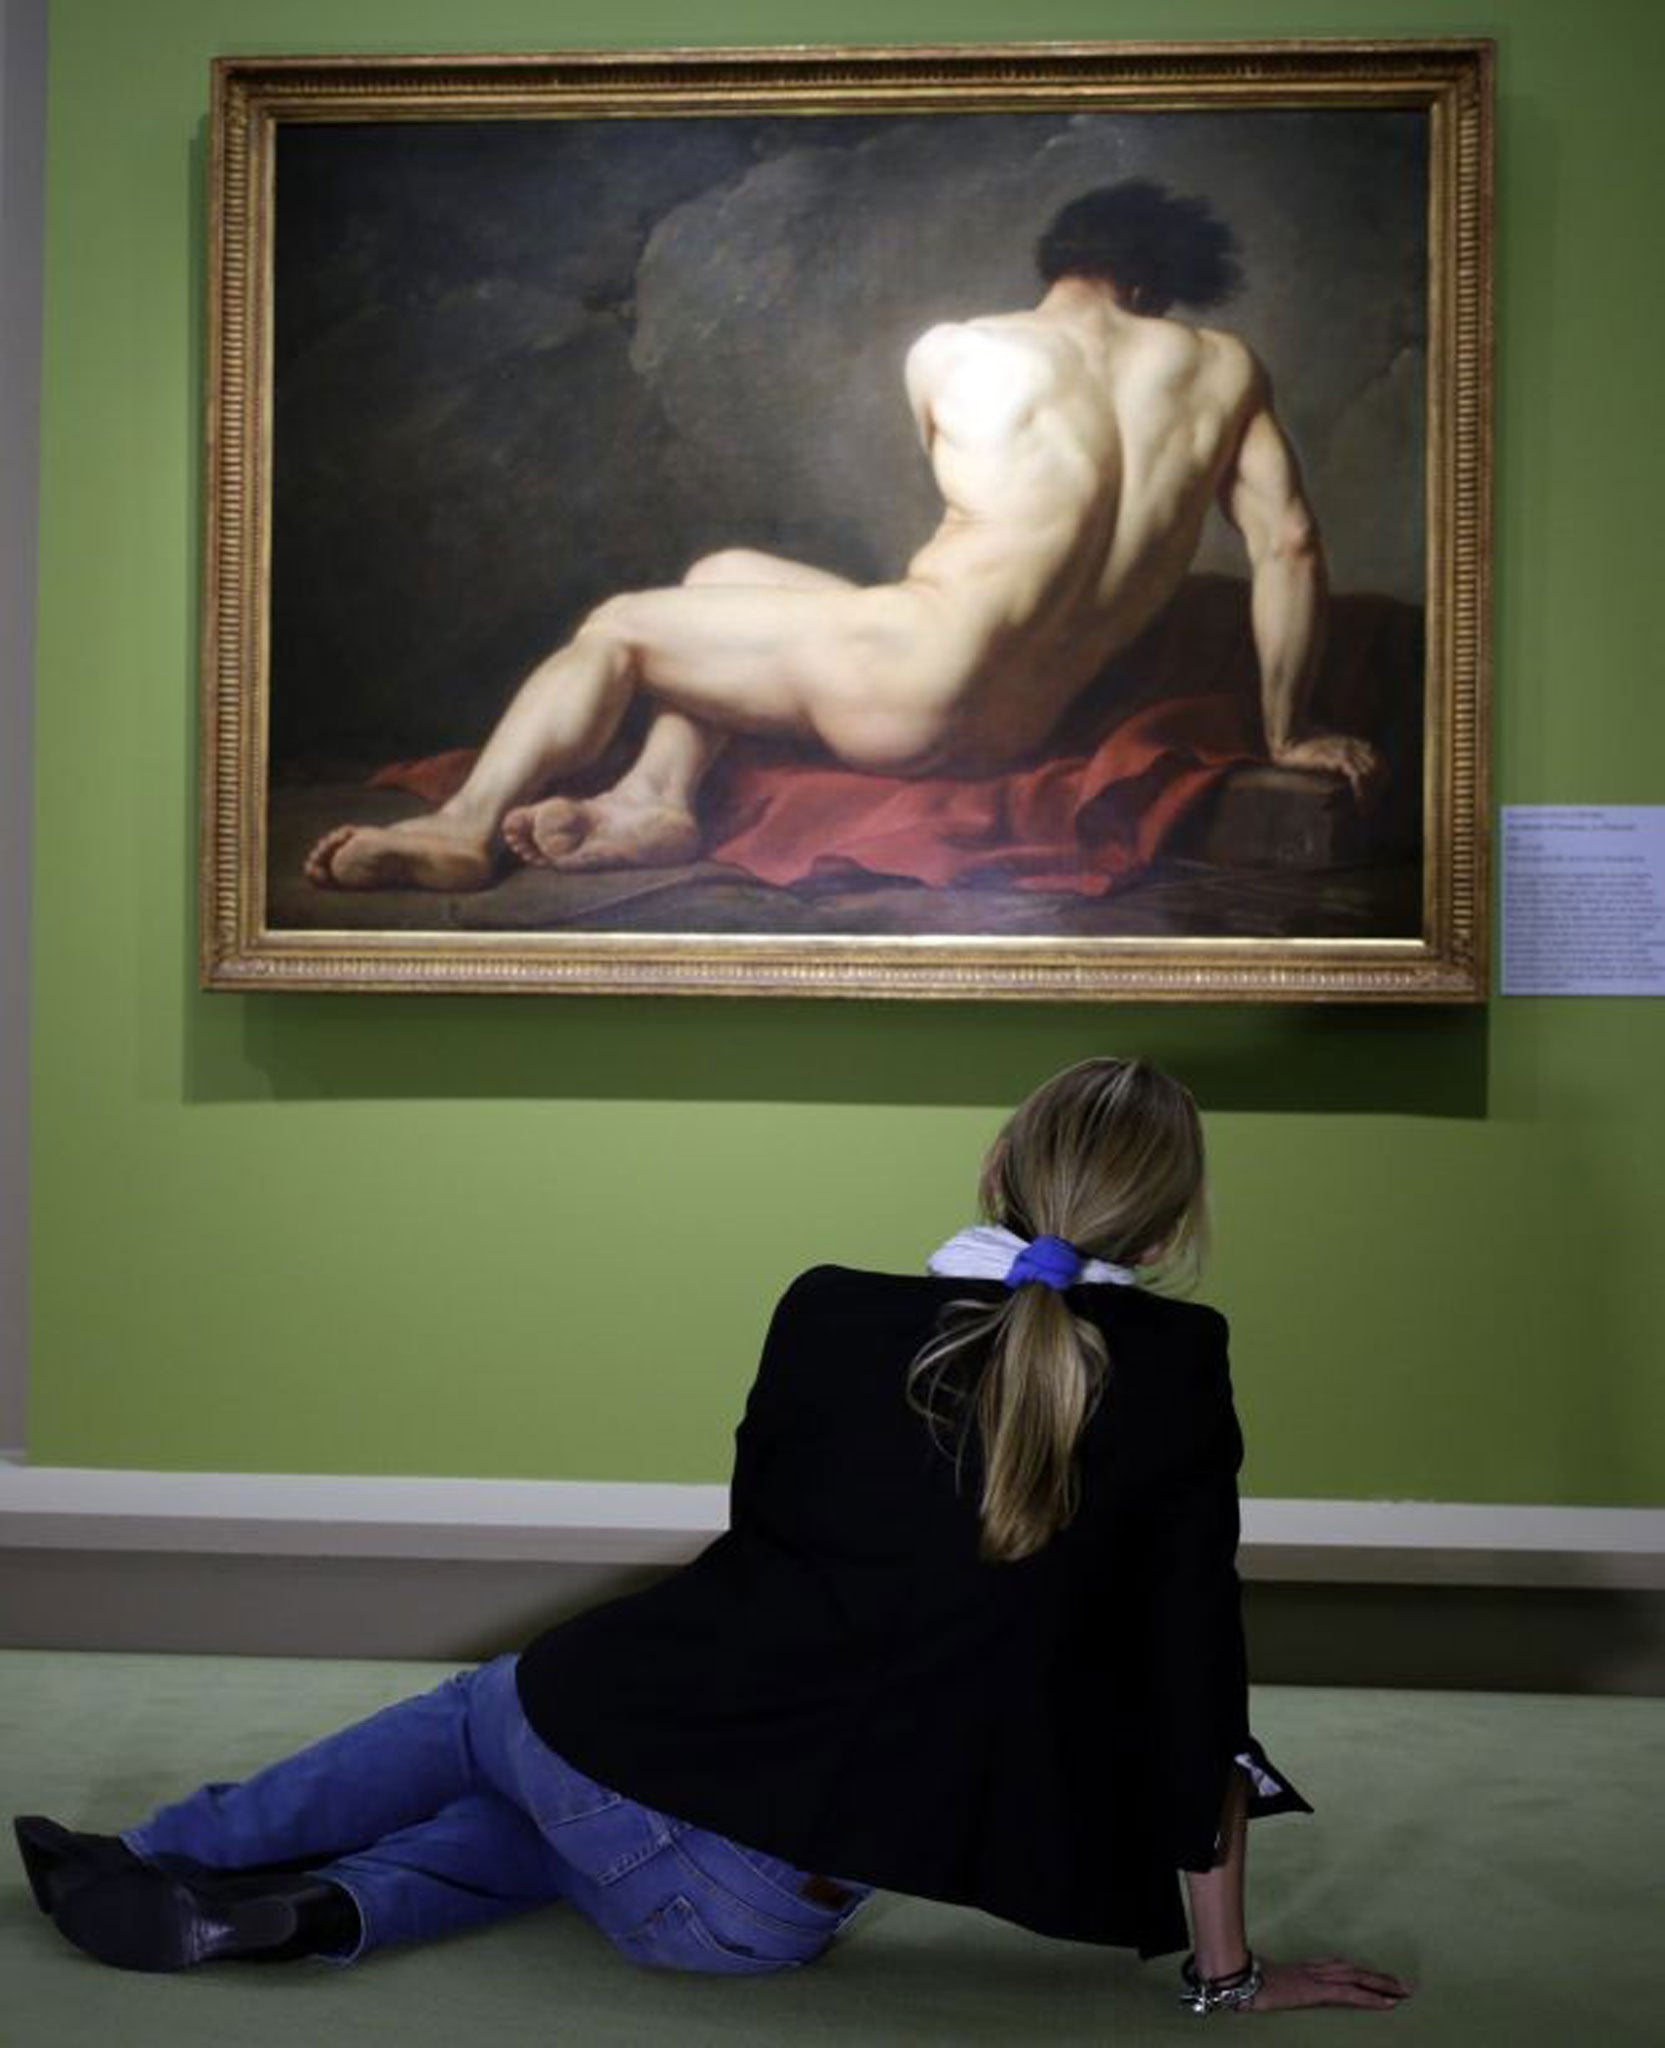 Investigations into the 'self': a visitor at the Orsay Museum in Paris